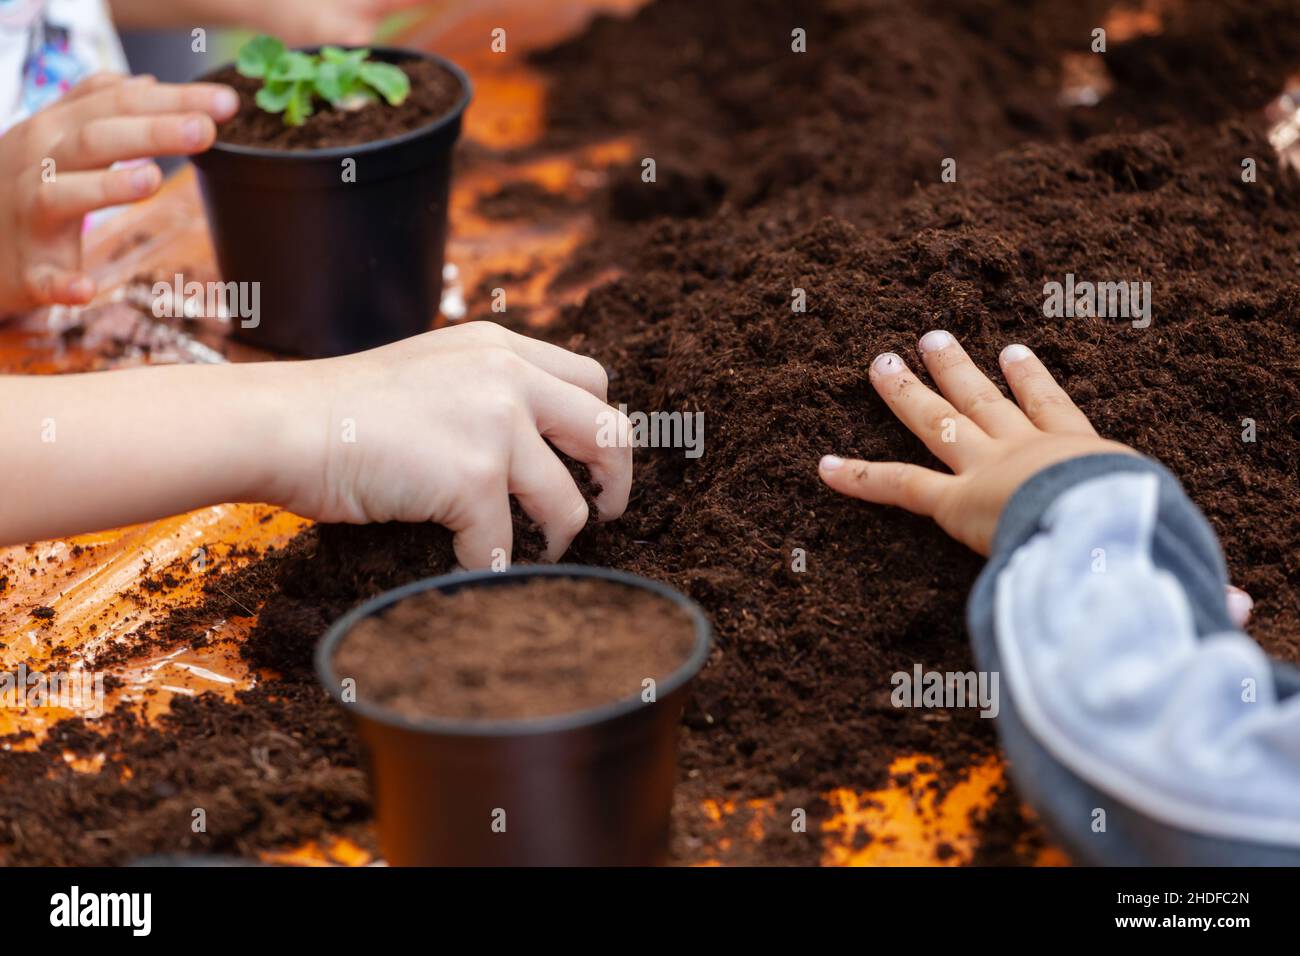 gardening, planting, soil, foolproof, plant care, tending of plants, soils Stock Photo